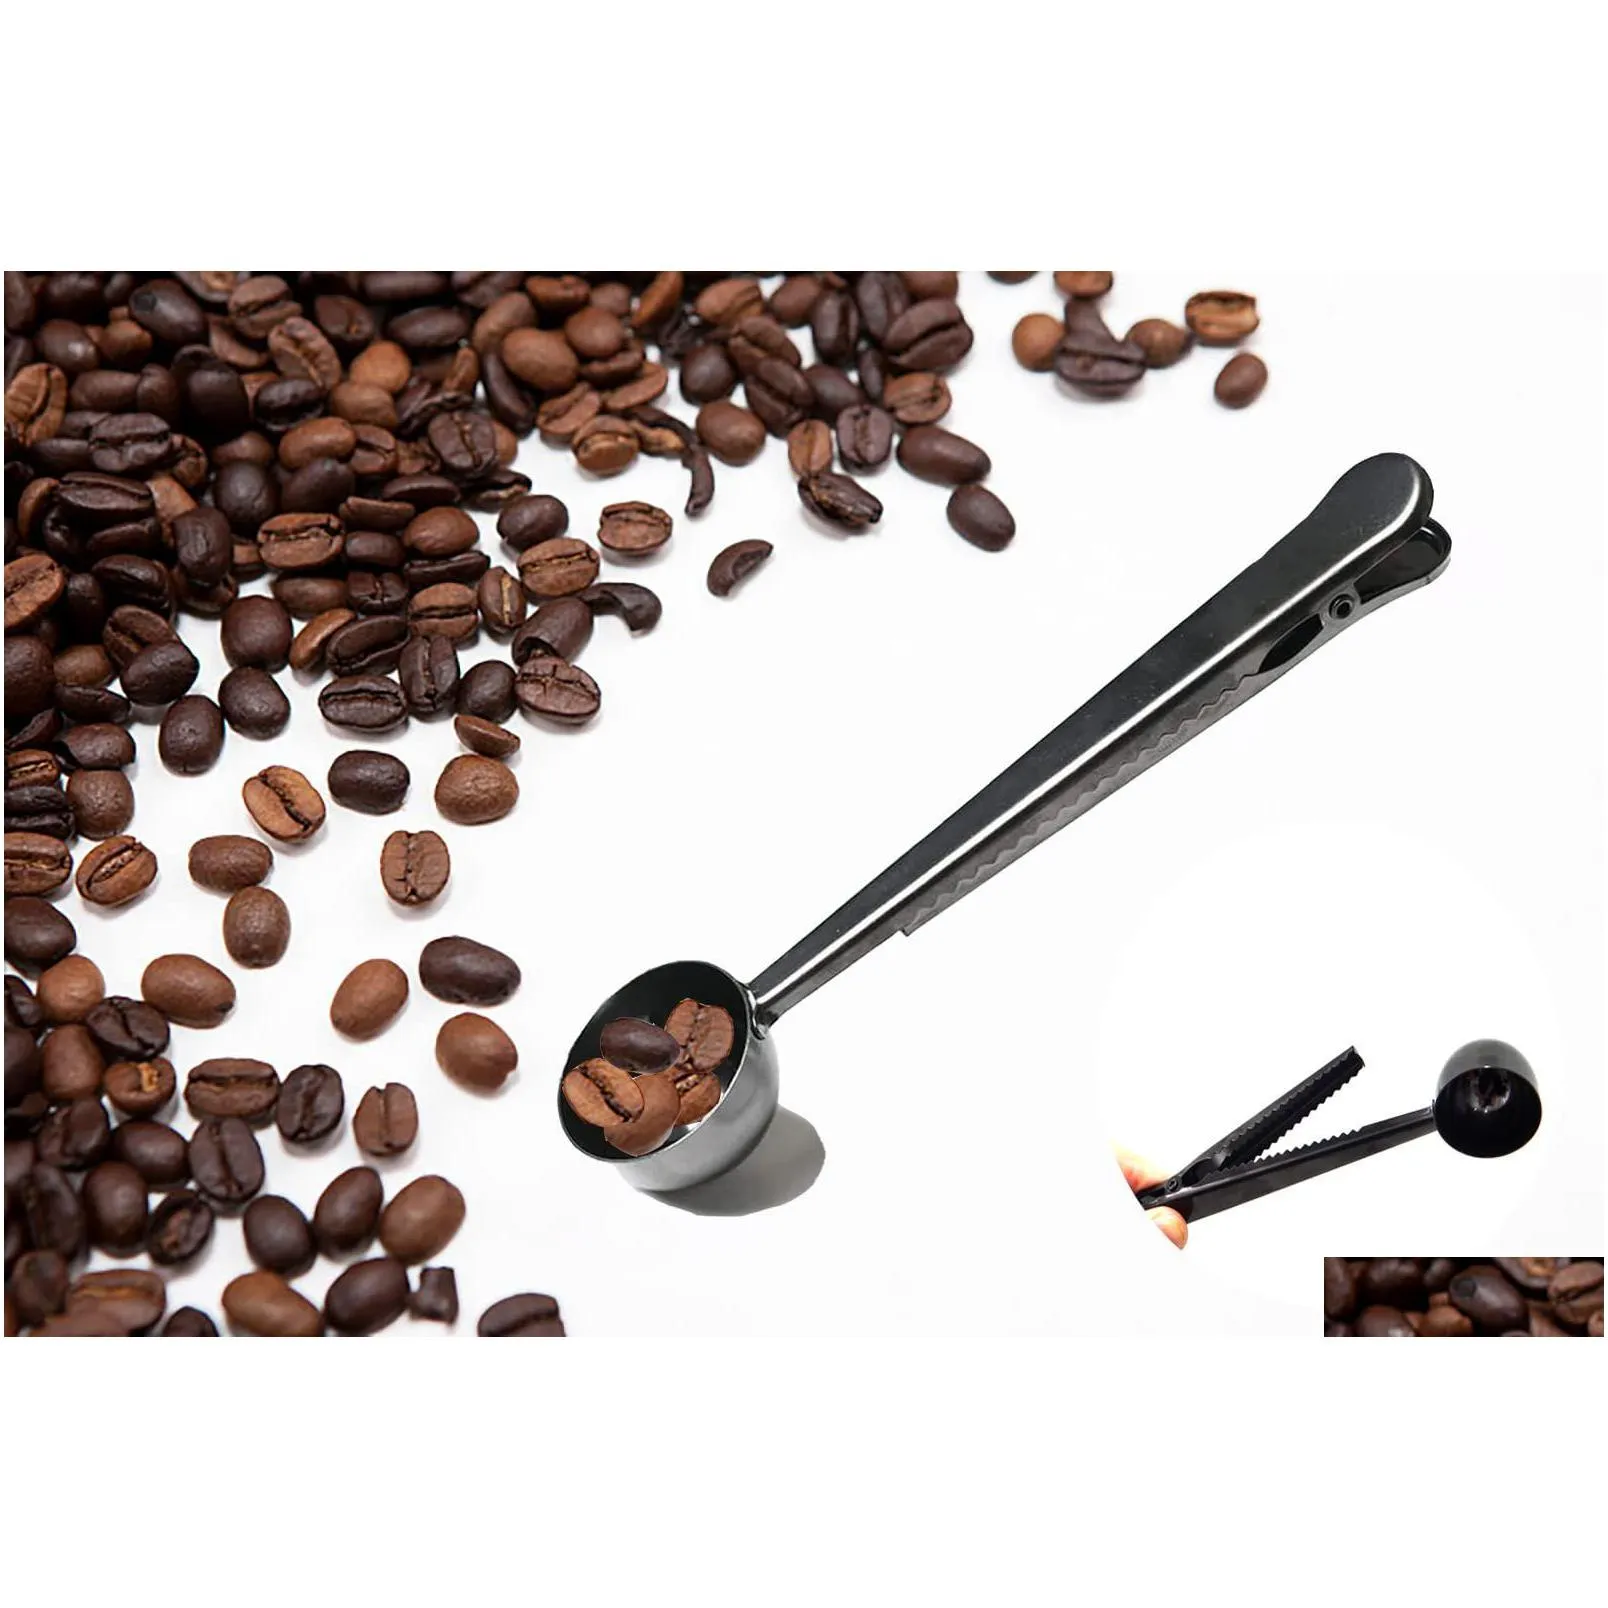 spoons coffee scoop stainless steel measuring spoon with bag clip coasters for ground espresso whole beans or tea home kitchen access